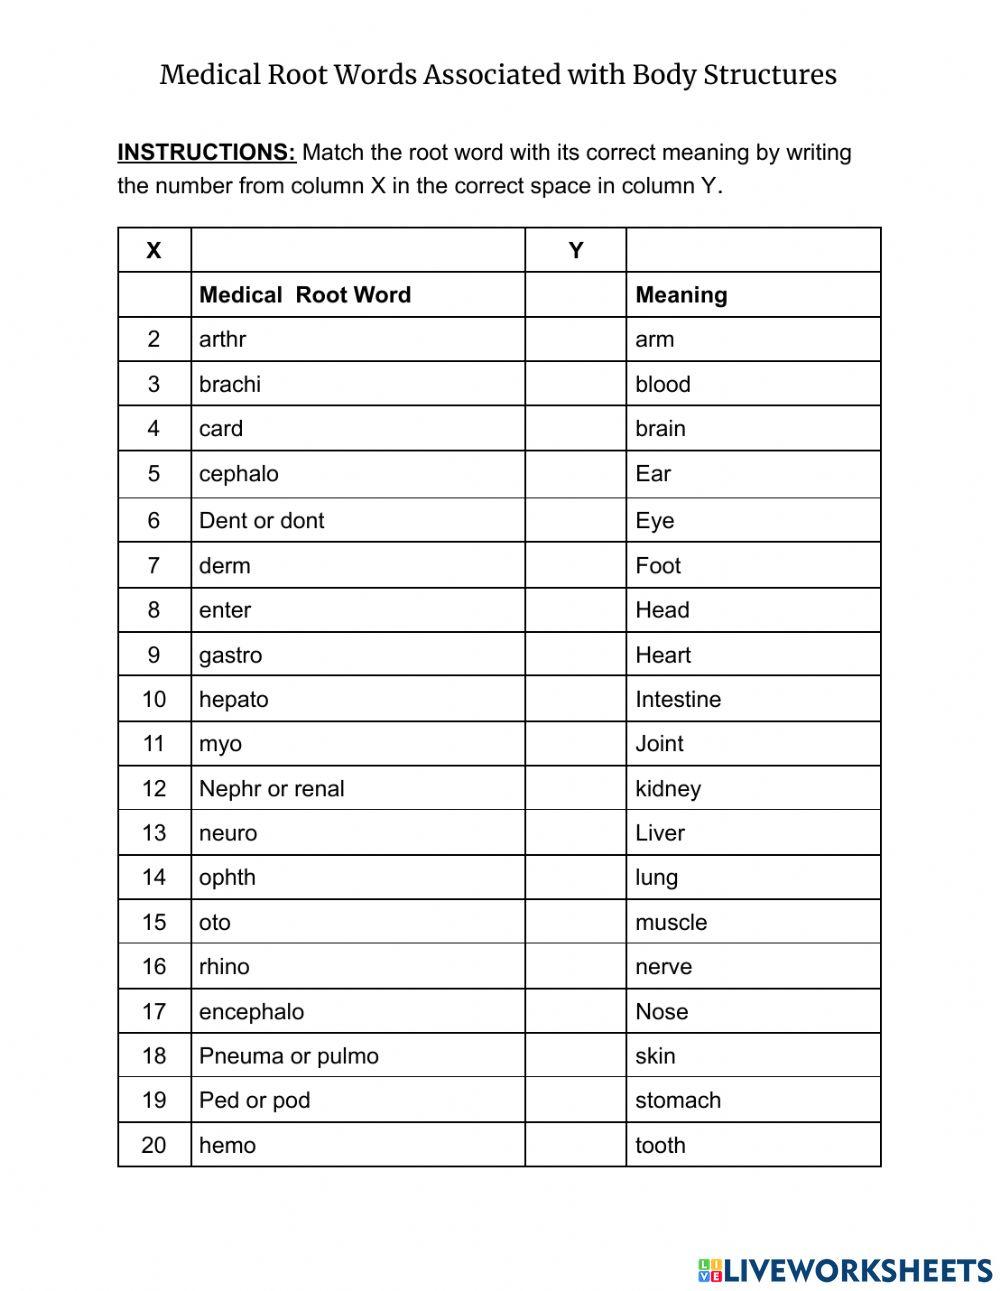 Medical Root Words related to Body Structures